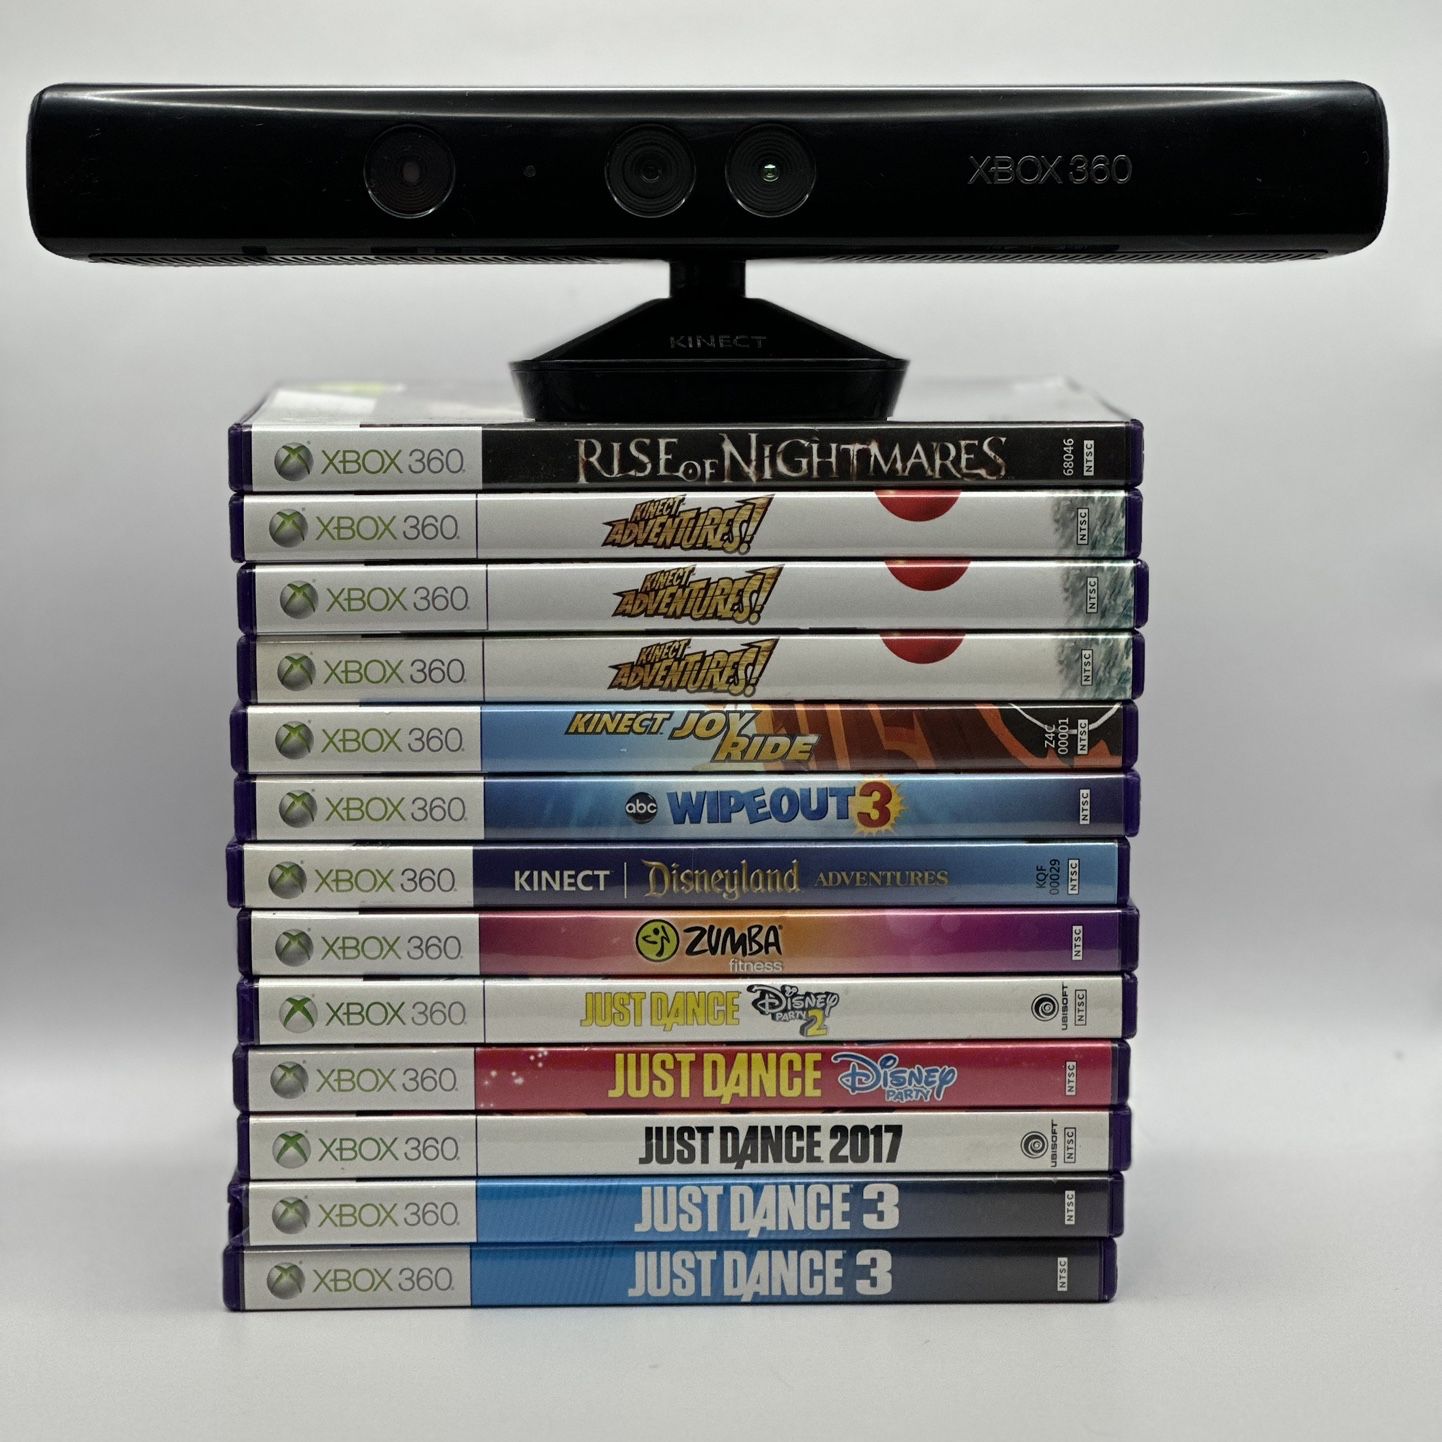 Xbox 360 4 Gb Kinect System with Just Dance 2014, Xbox Live Triple Pack &  Headset - Sam's Club